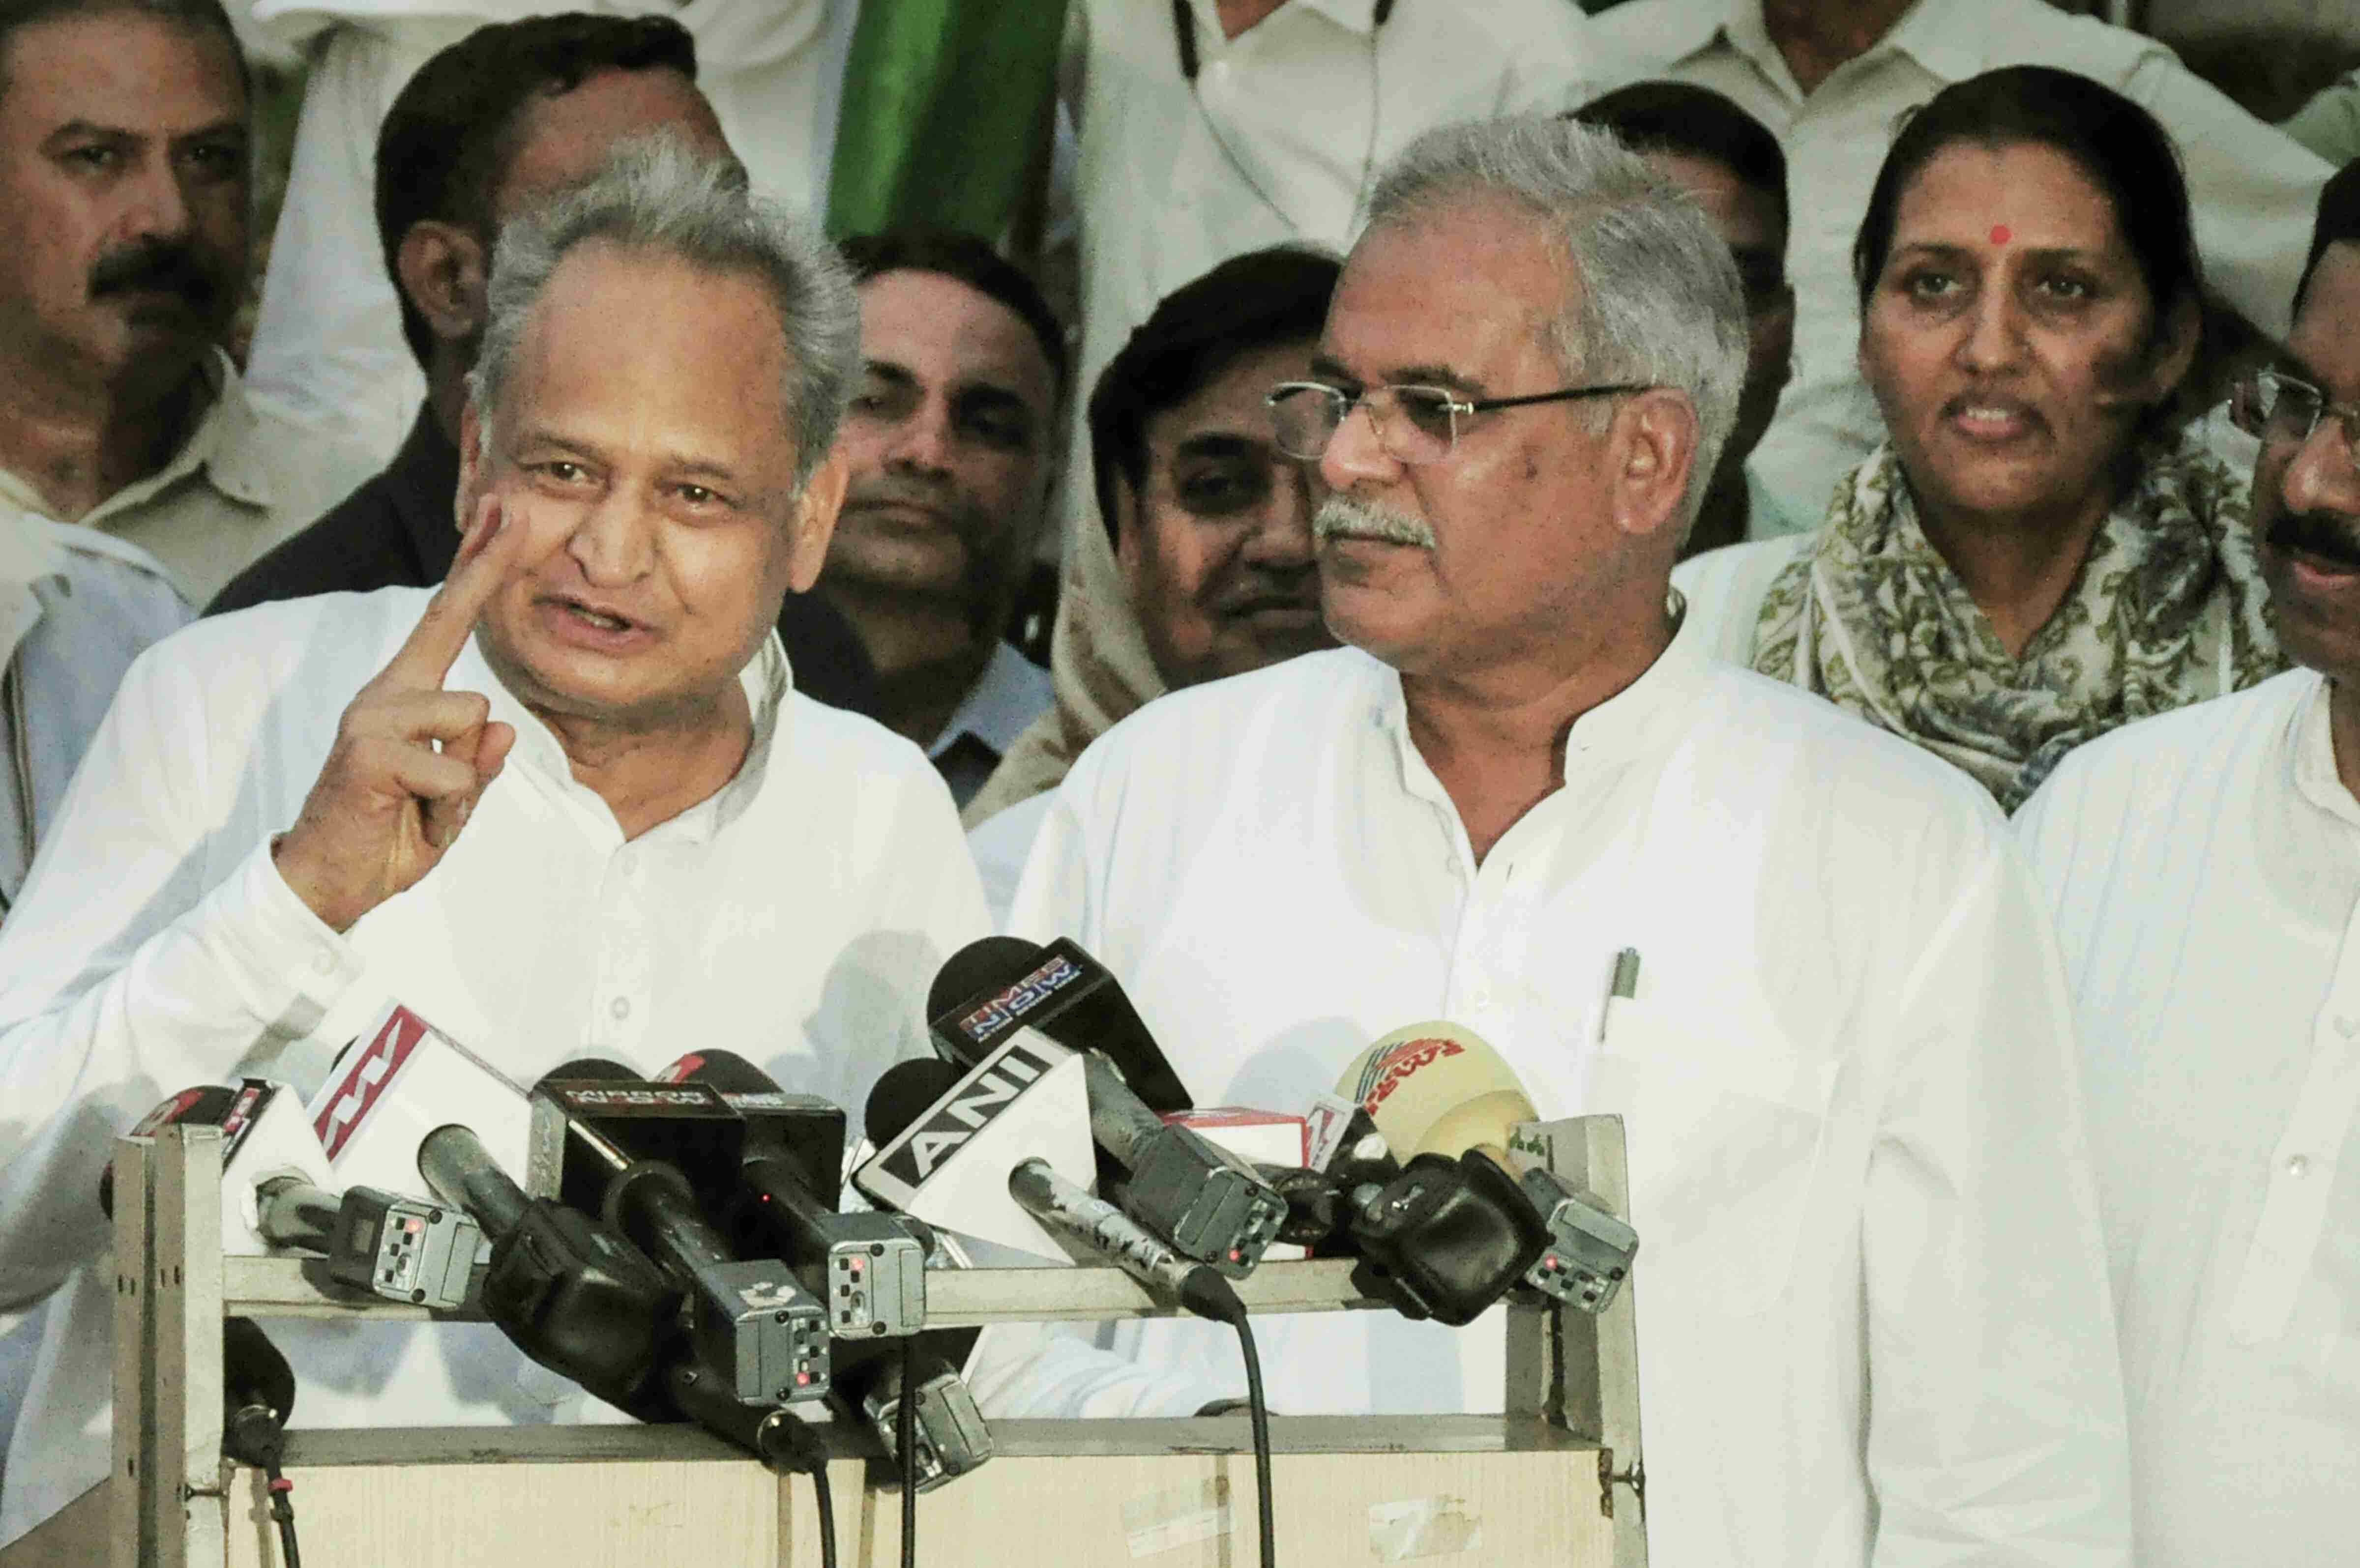 Govt blocking political activities, will face consequences: Congress